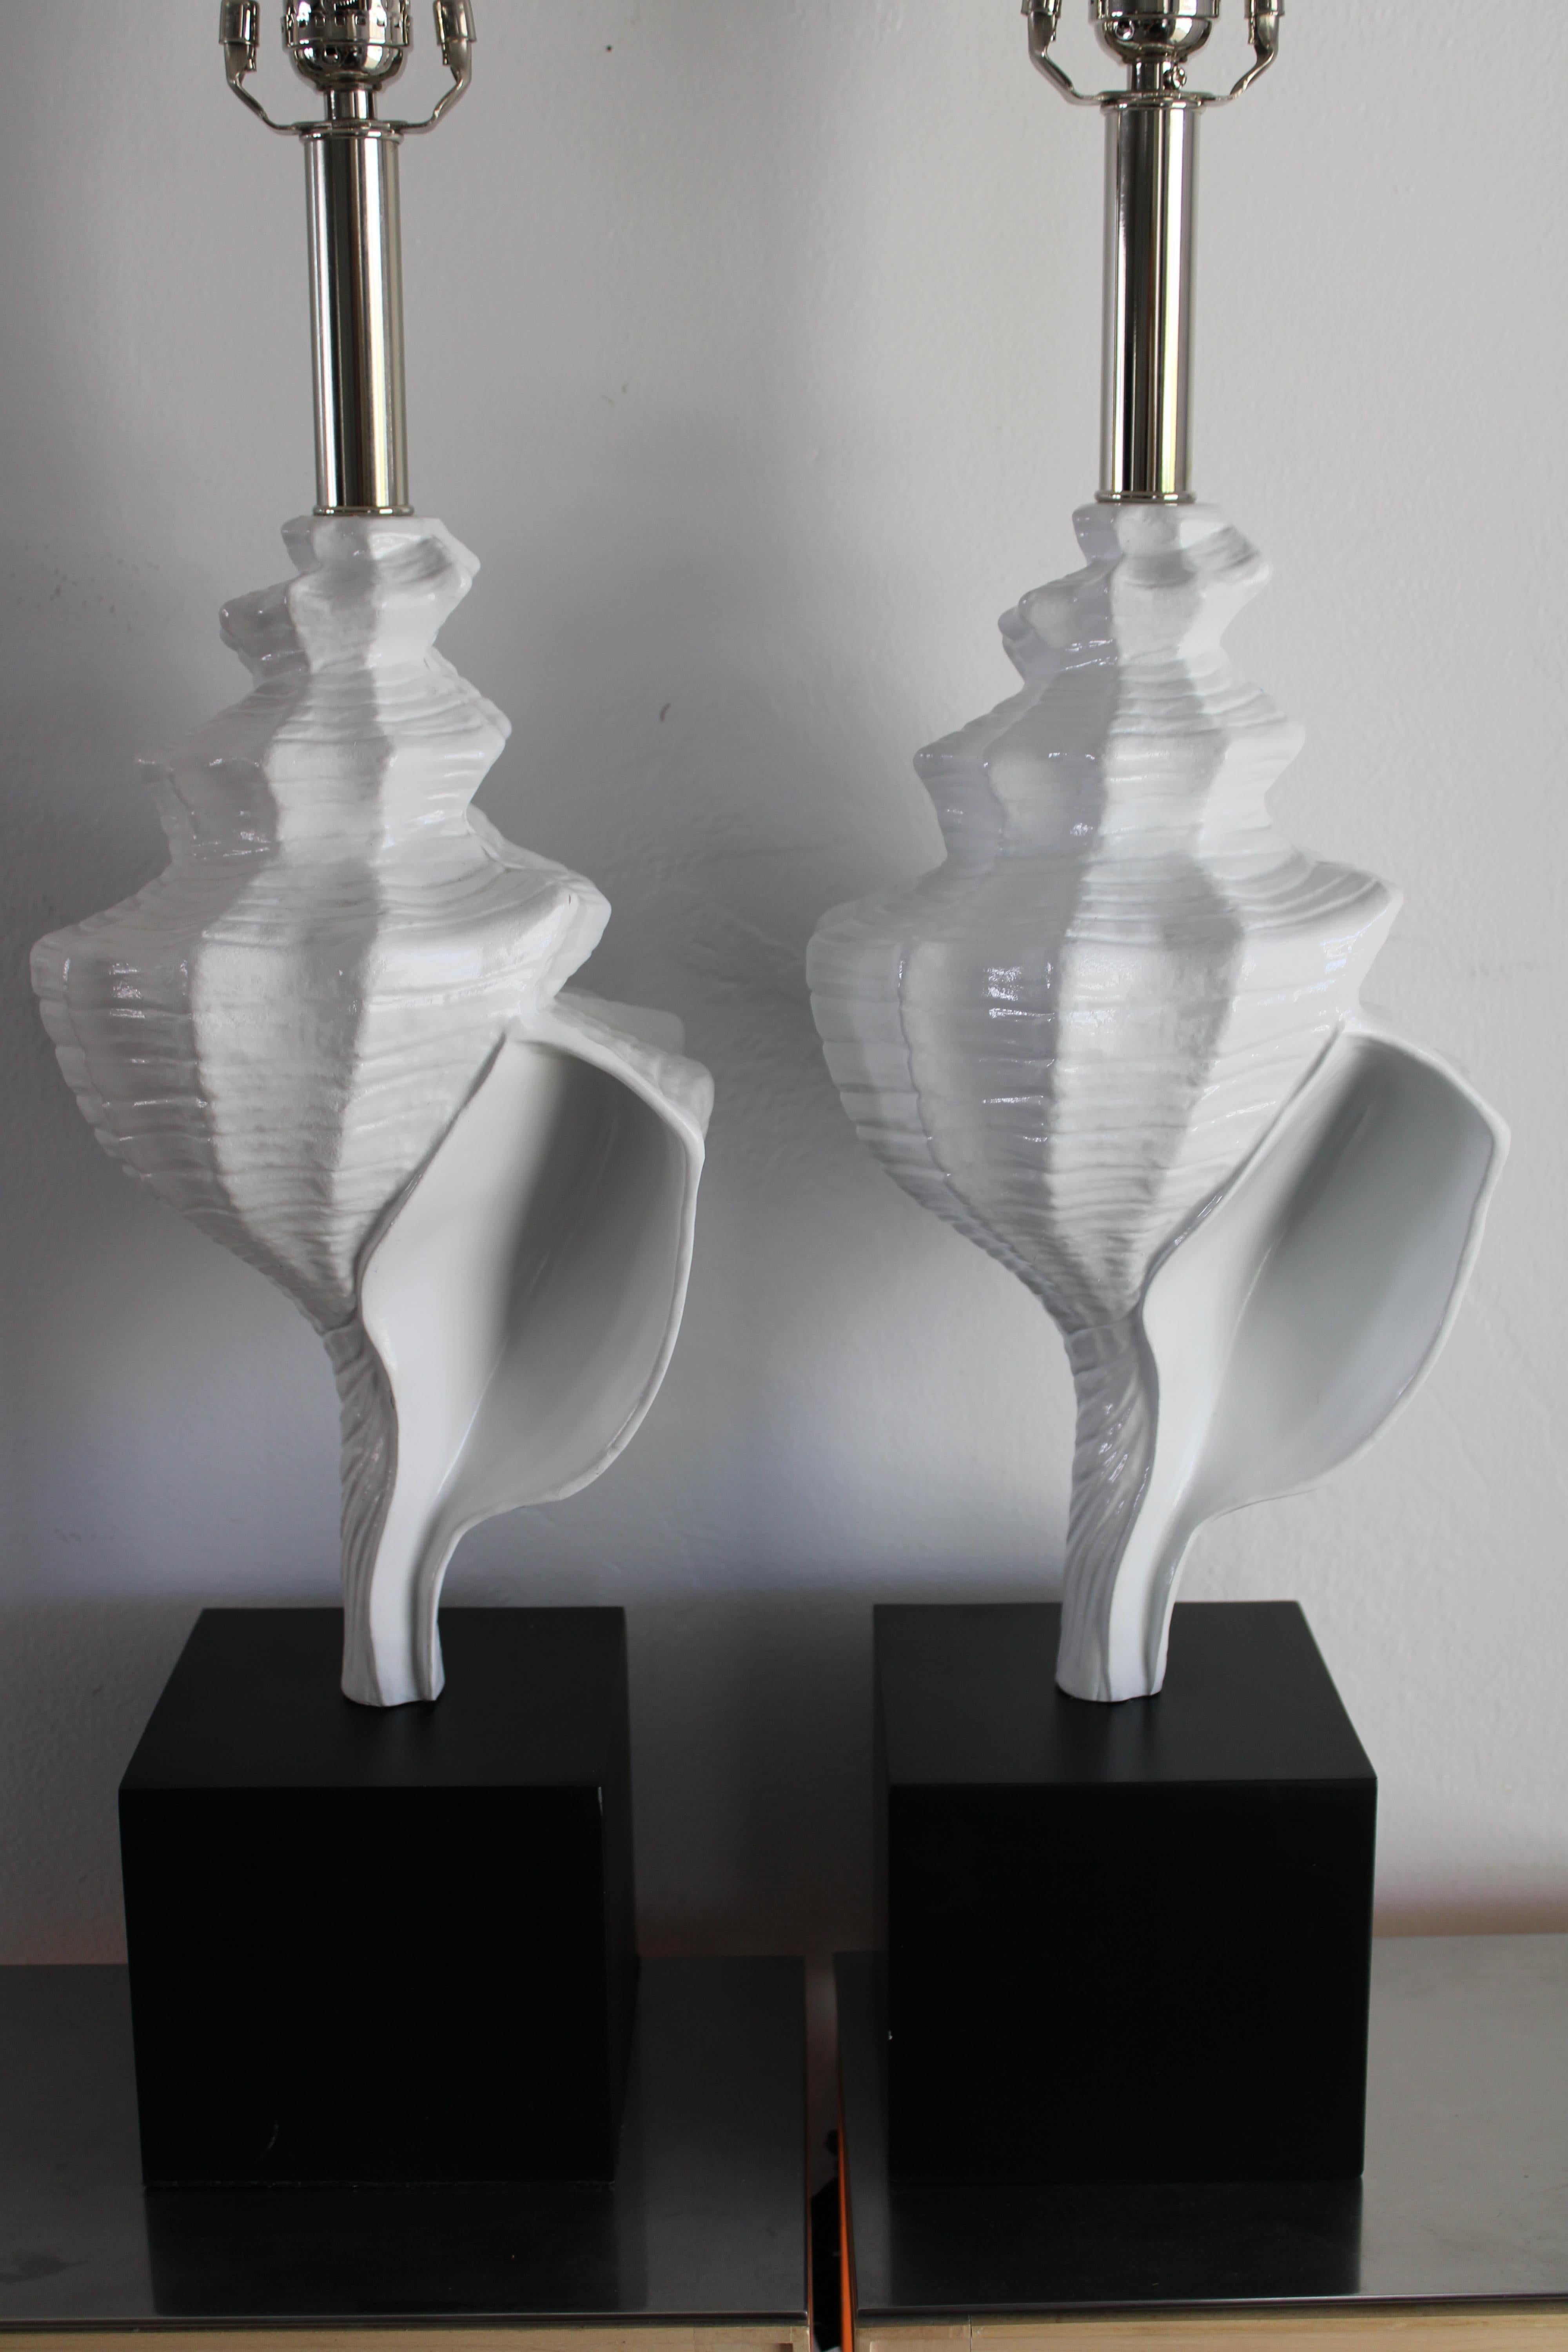 Pair of aluminum seashell lamps attributed to the Laurel Lamp Company, Newark, New Jersey. The seashell is 13.25” high. Total height from the base to the bottom of socket is 22.5”. Base is 5.5” wide, 5.5” deep and 5” high. Lamps have been